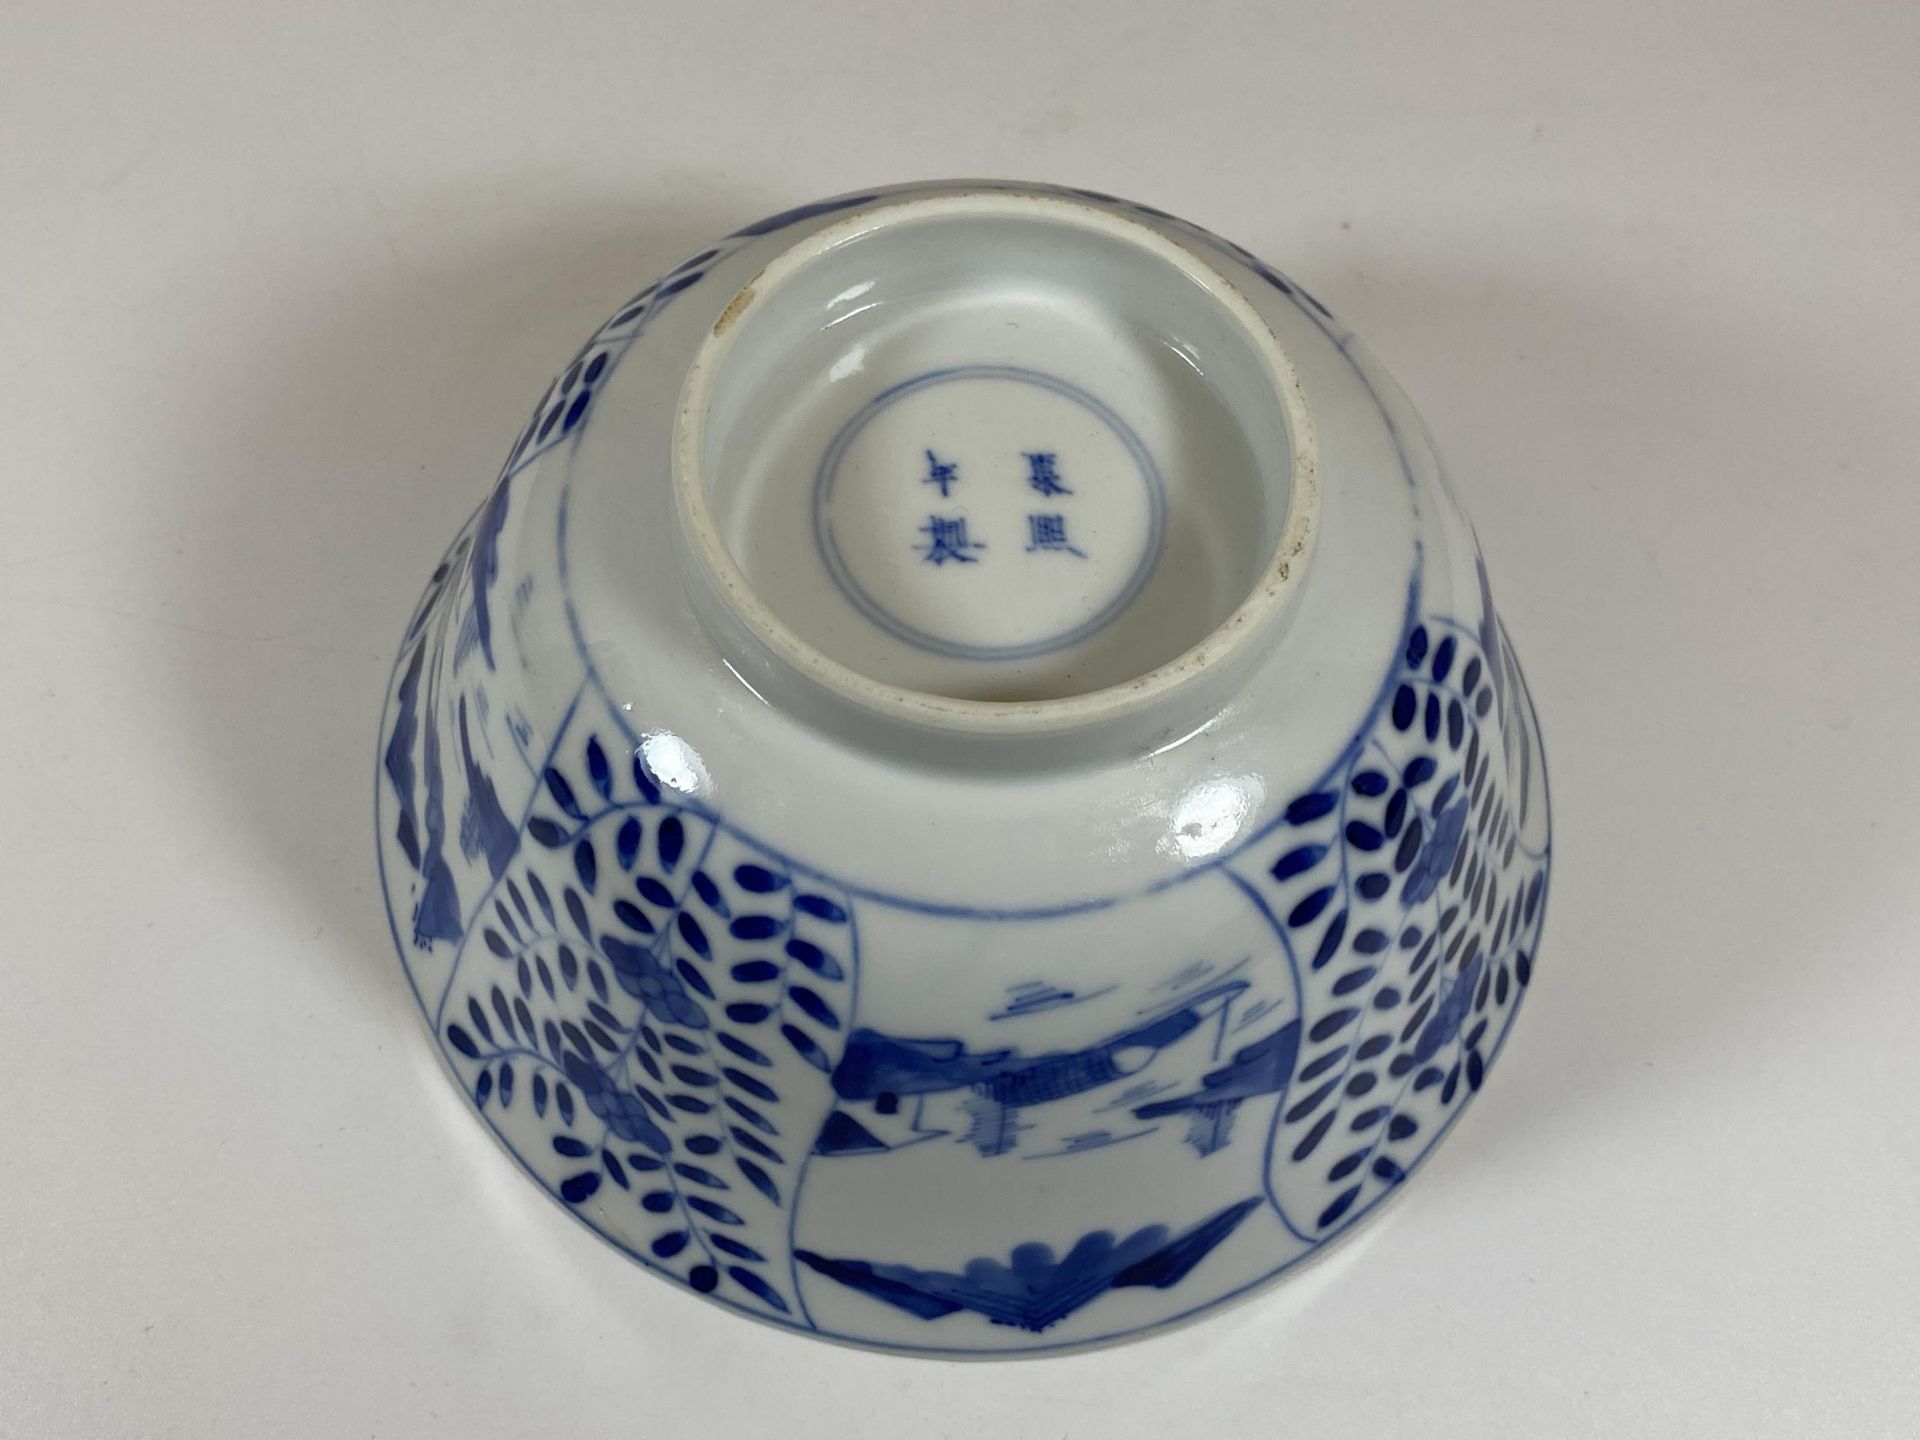 AN 18TH CENTURY CHINESE BLUE AND WHITE PORCELAIN BOWL, FOUR CHARACTER DOUBLE RING MARK TO BASE, - Image 4 of 7